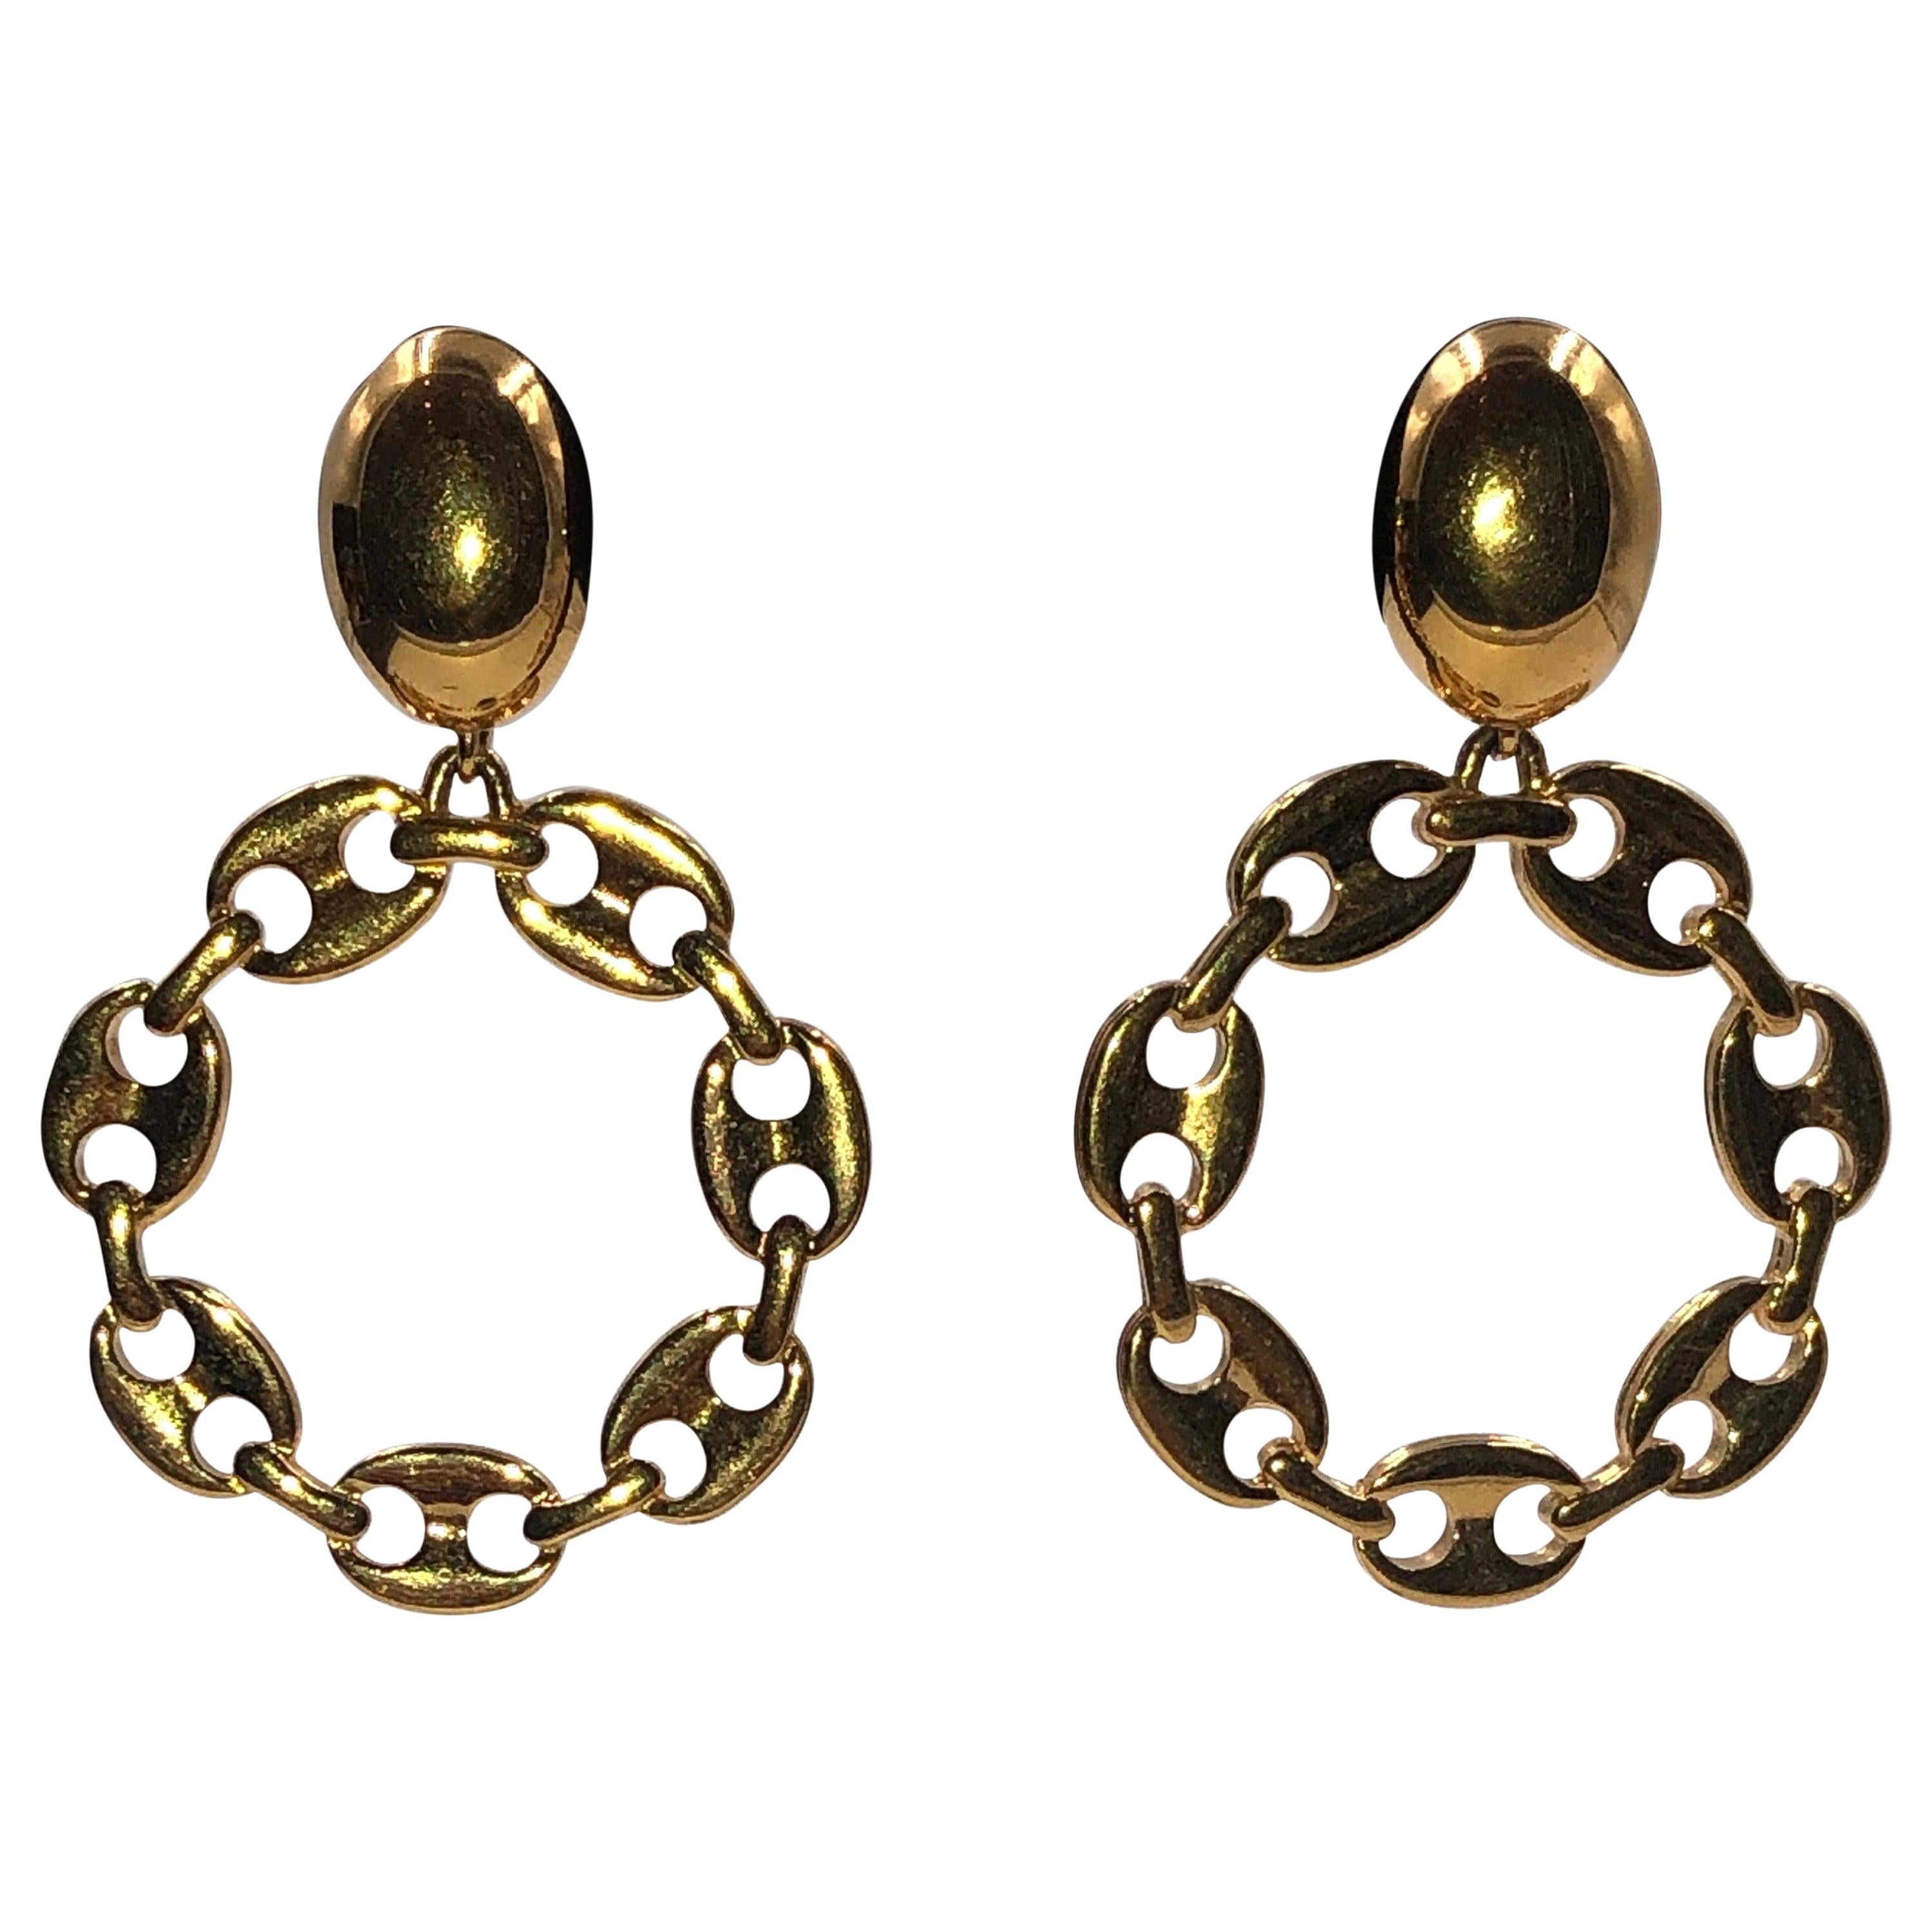 Monet Gucci Style Link Round Pierced Earrings For Sale